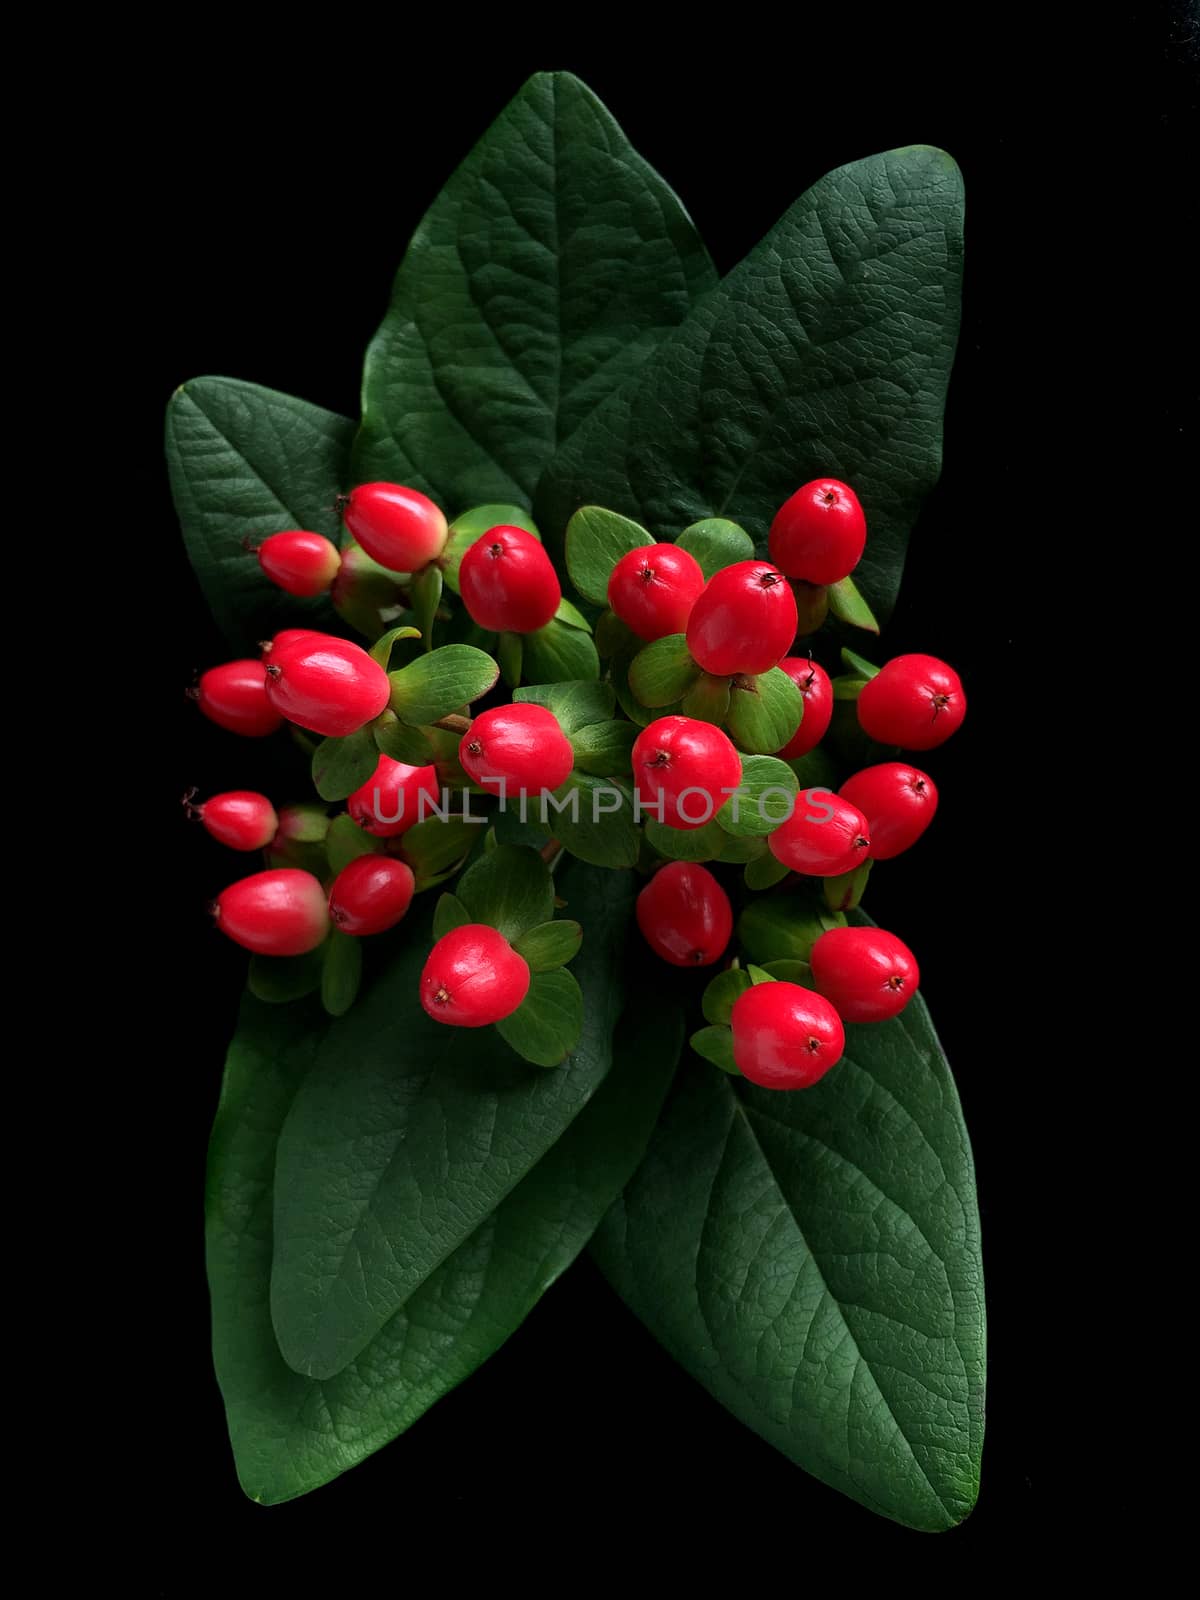 Bouquet of hypericum plants (twigs with red berries) on wooden background. Traditional christmas decoration.